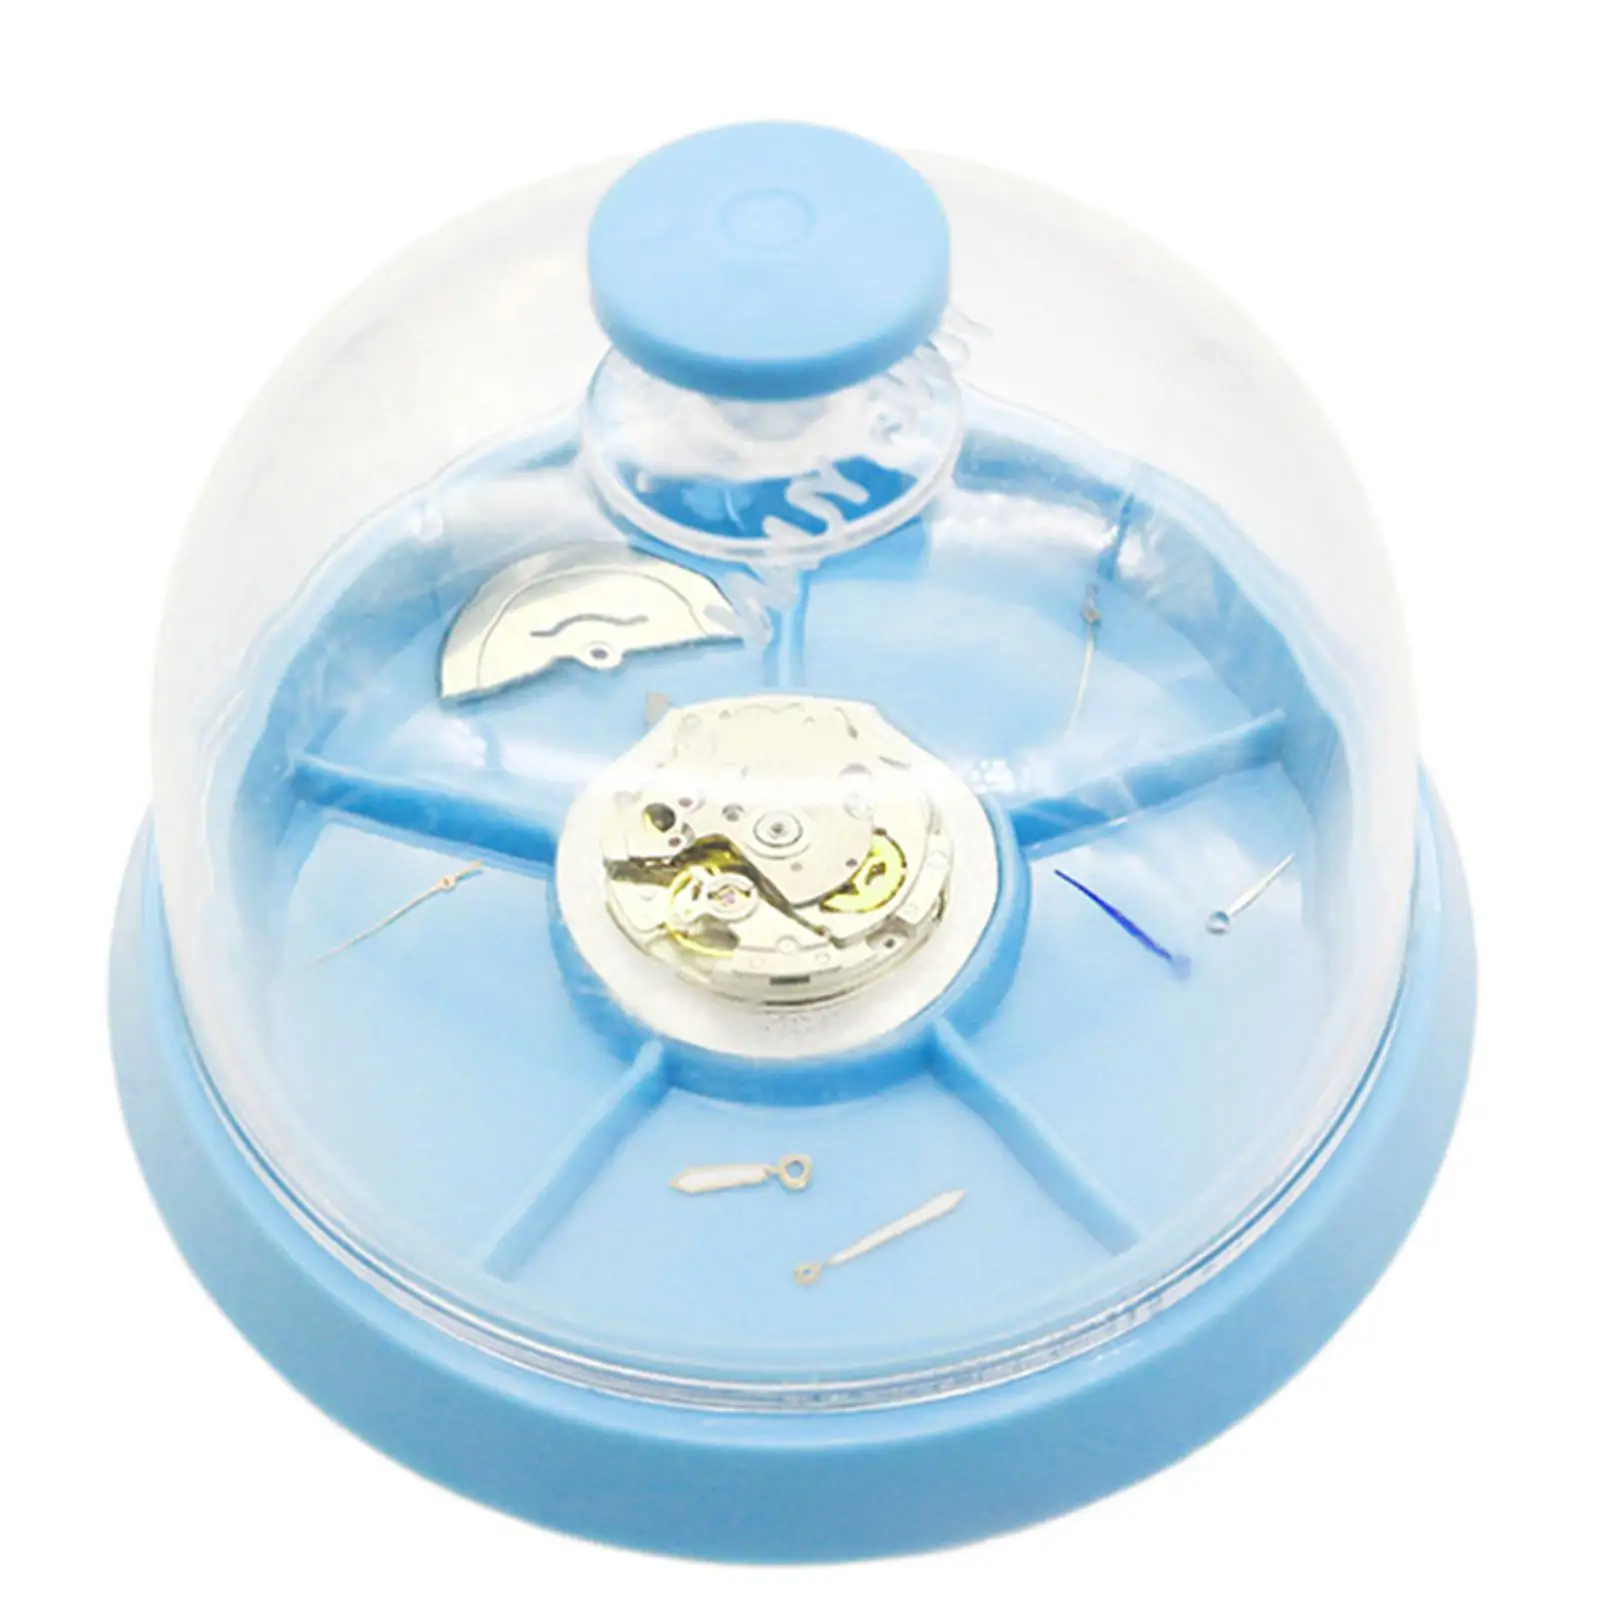 Watch Movement Dust Cover Plastic 5 Storage Compartments for Watches Movement Parts Storage Tray Watch Movement Tray